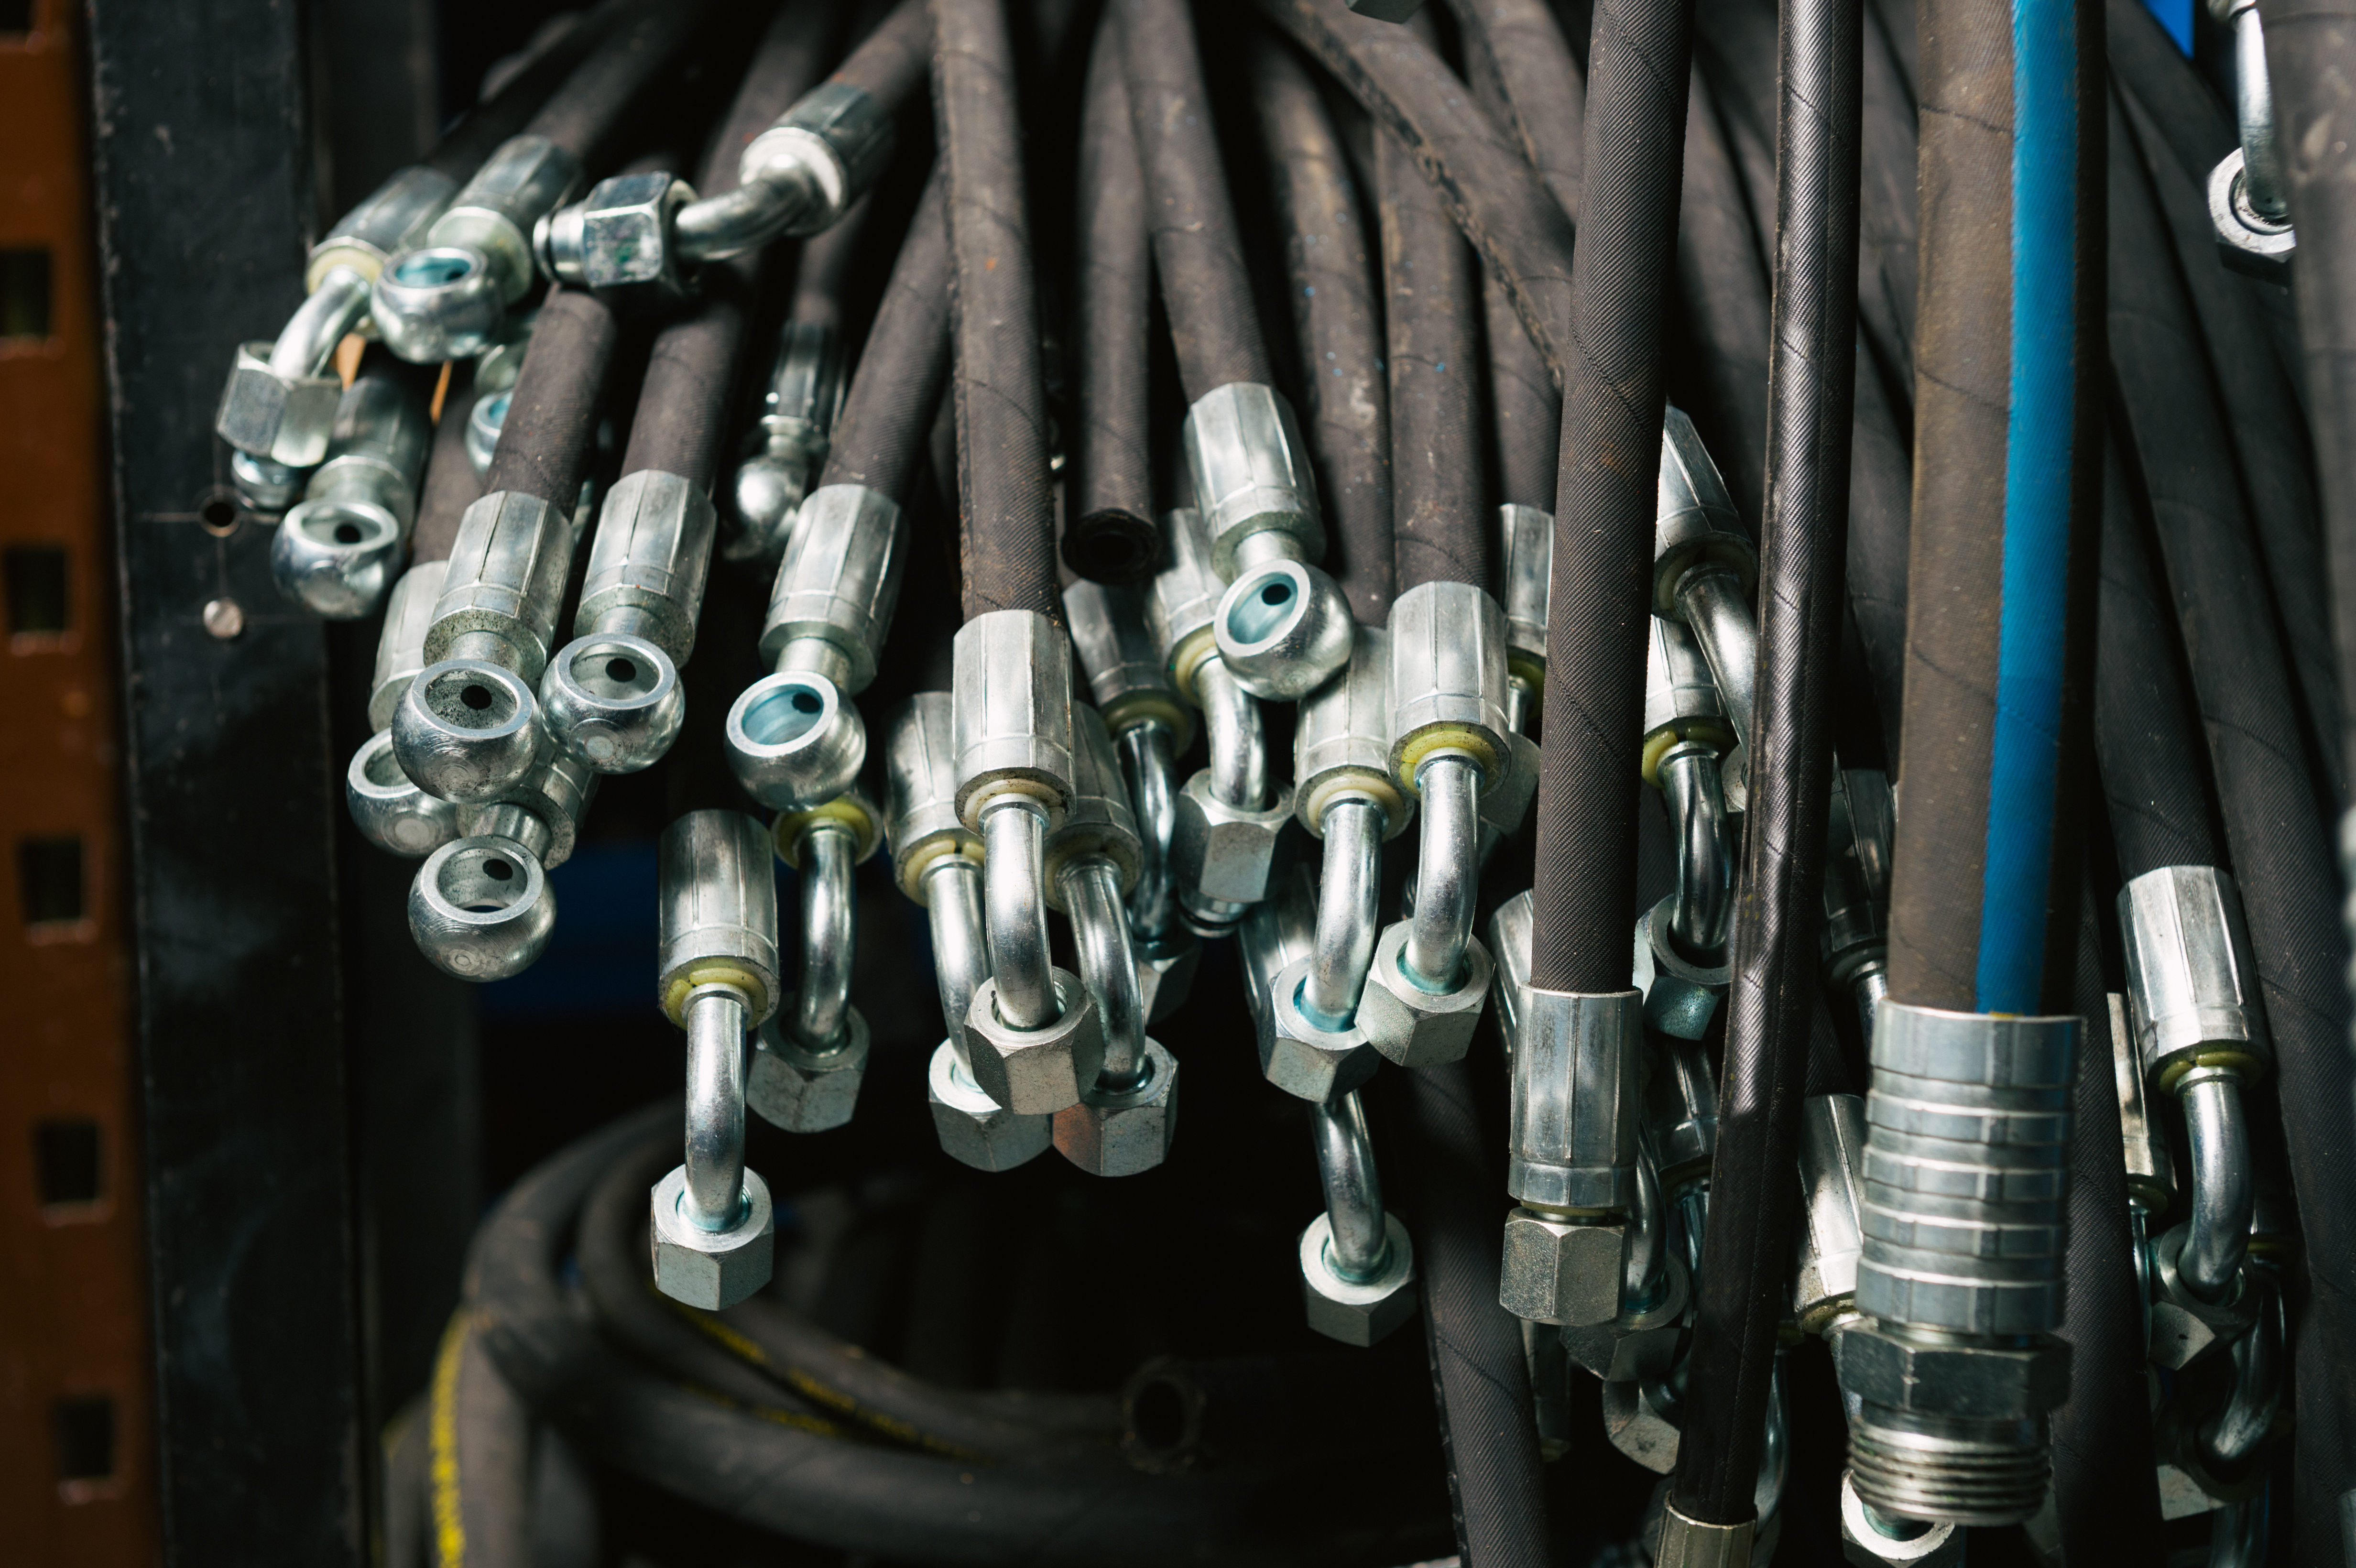 Pile of hoses